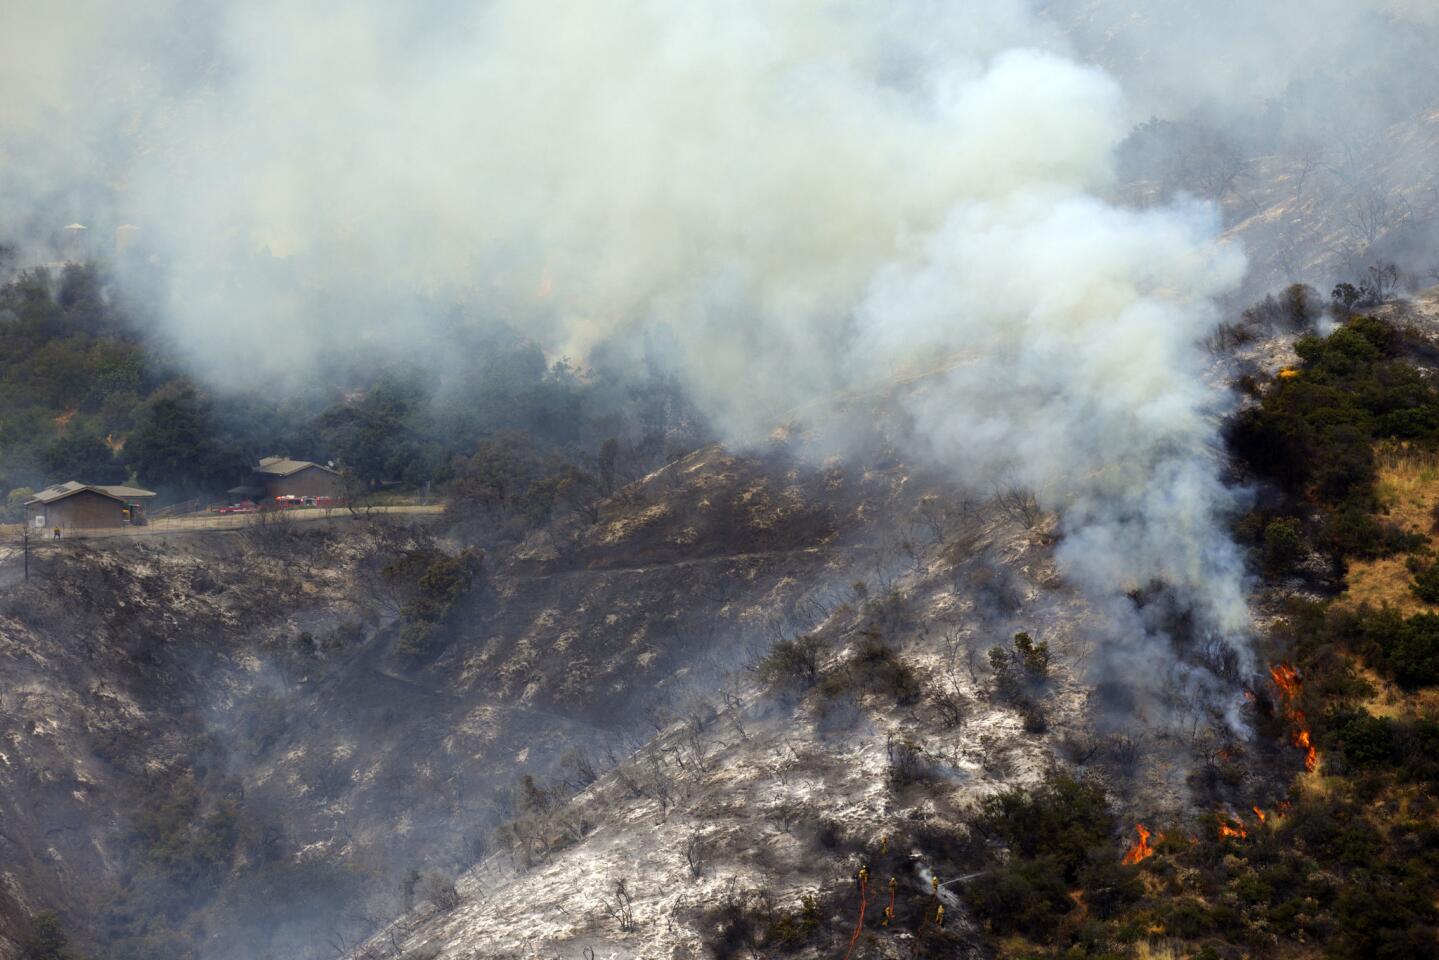 Firefighters battle a brush fire from the ground in Mandeville Canyon in the Brentwood neighborhood of Los Angeles.